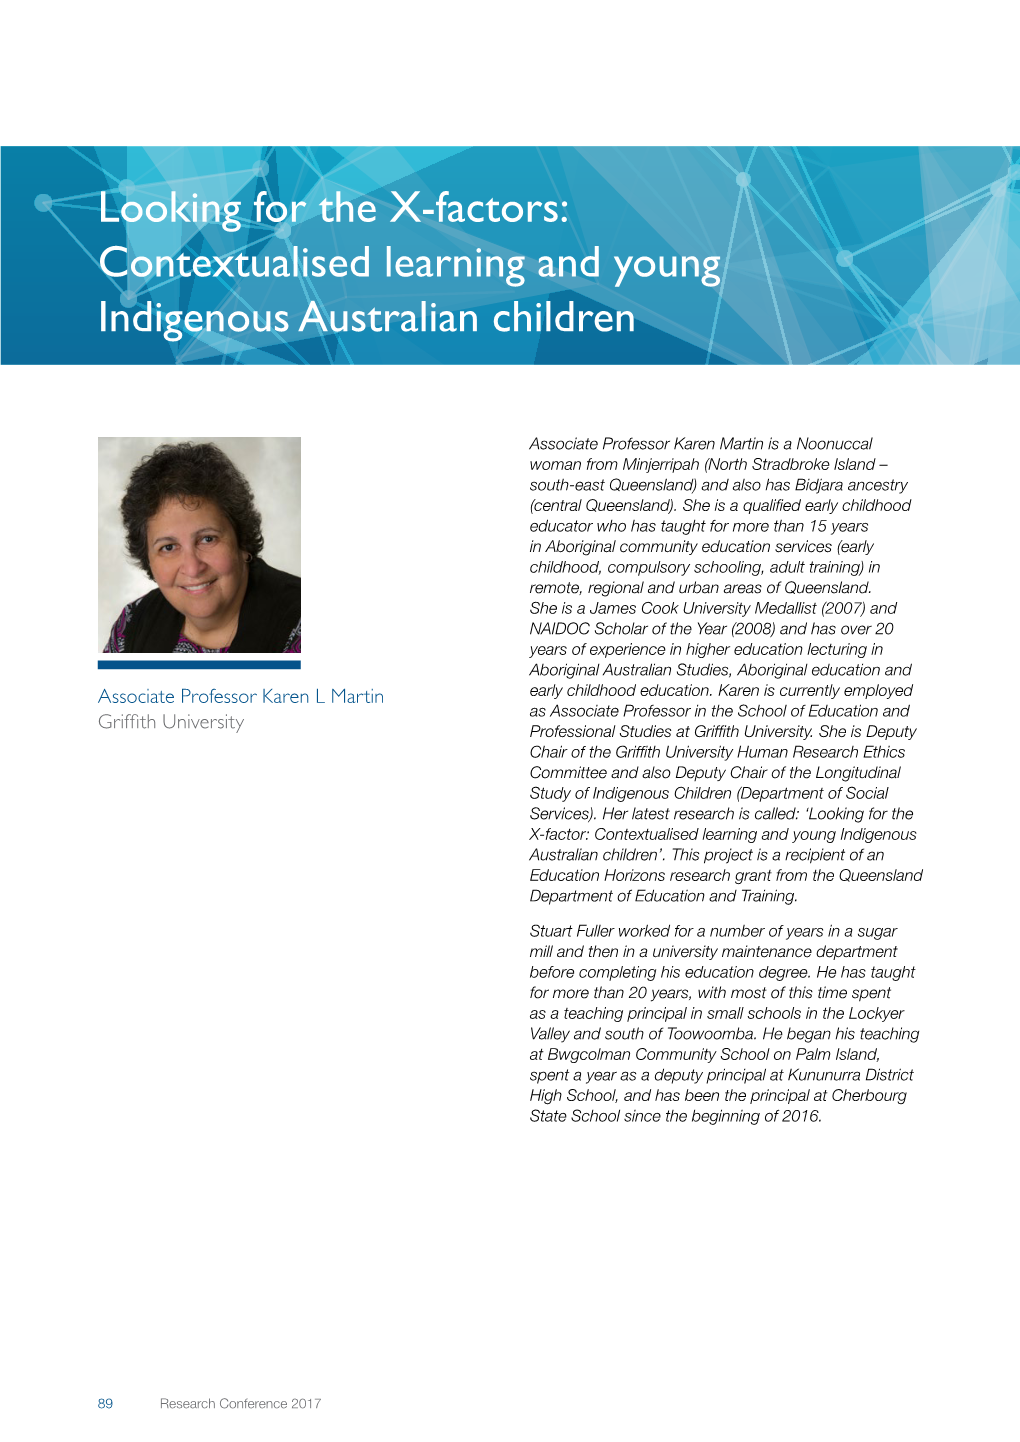 Contextualised Learning and Young Indigenous Australian Children